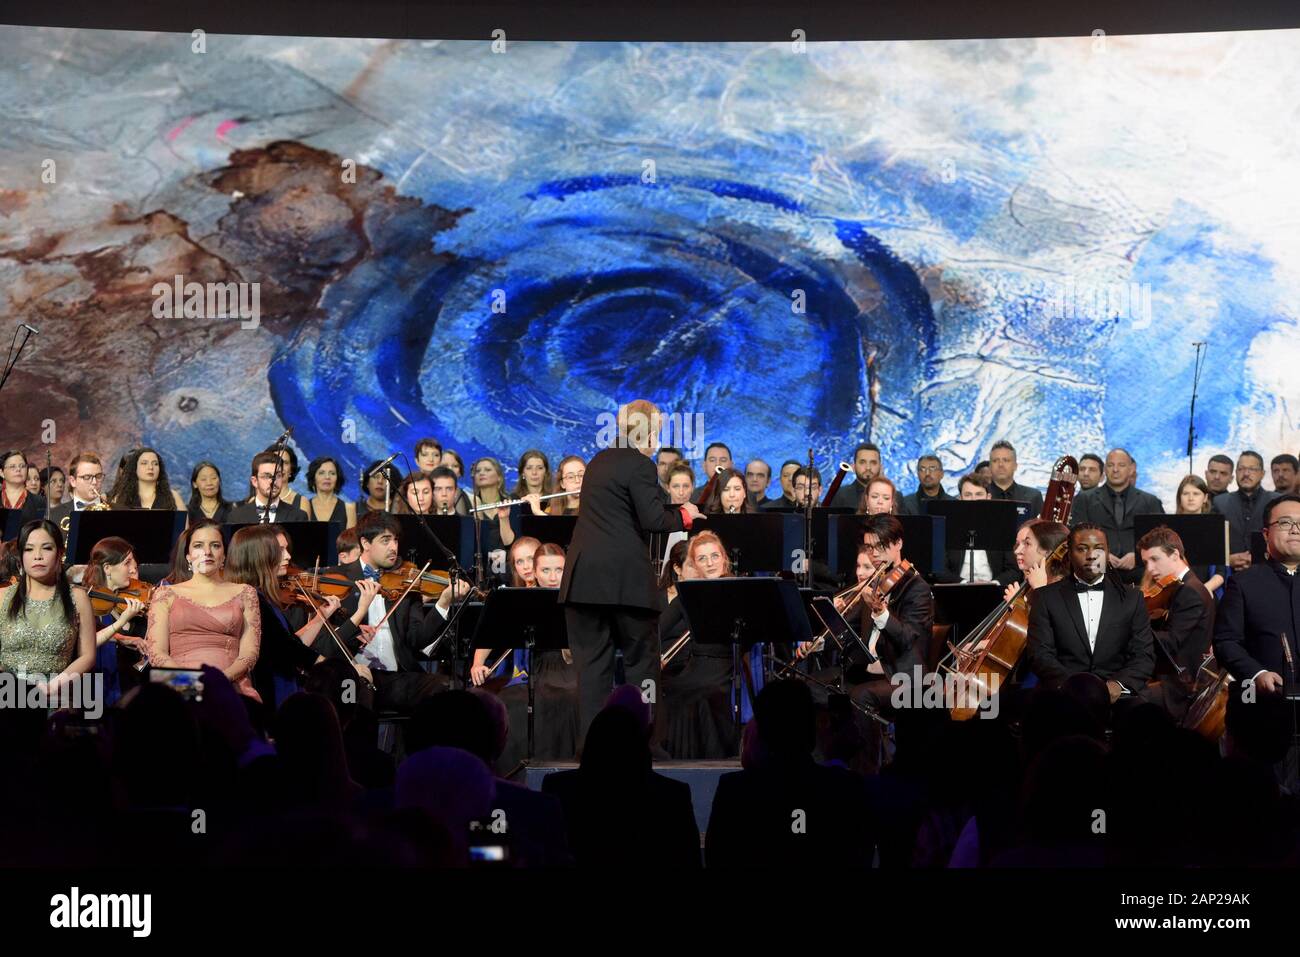 Davos, Switzerland. 20th Jan, 2020. Artists perform at the opening concert of the World Economic Forum (WEF) in Davos, Switzerland, Jan. 20, 2020. The WEF Annual Meeting 2020 is scheduled to take place on Jan. 21-24 in Davos-Klosters in Switzerland. Credit: Guo Chen/Xinhua/Alamy Live News Stock Photo